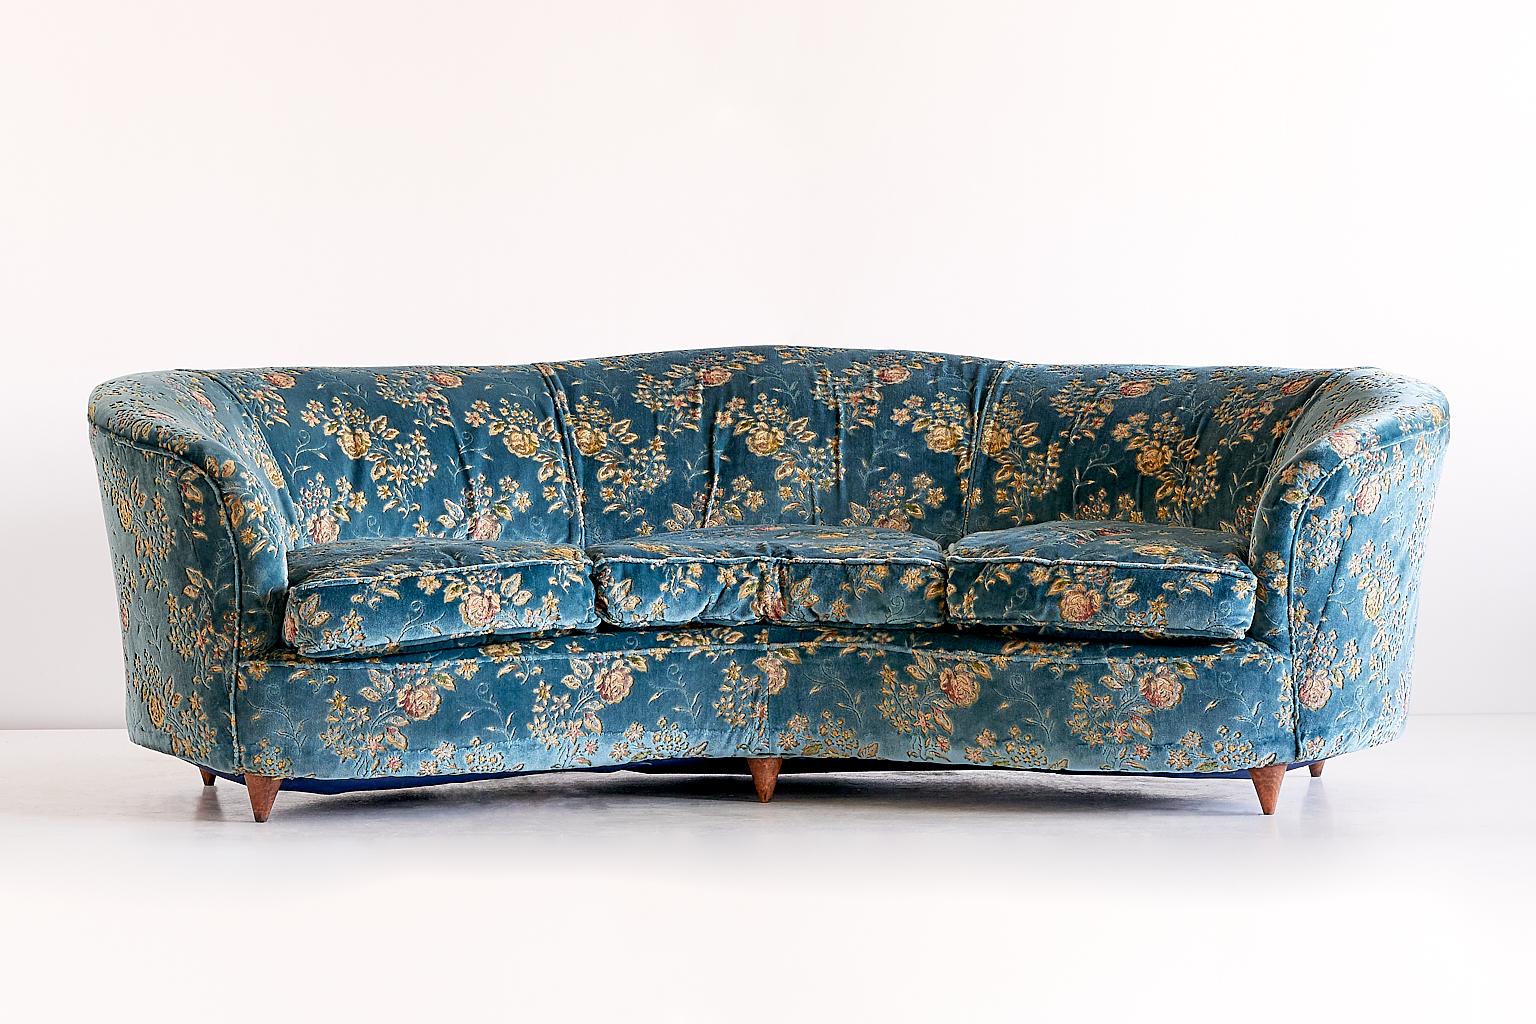 Italian Large Gio Ponti Attributed Curved Sofa in Original Blue Floral Upholstery, 1930s